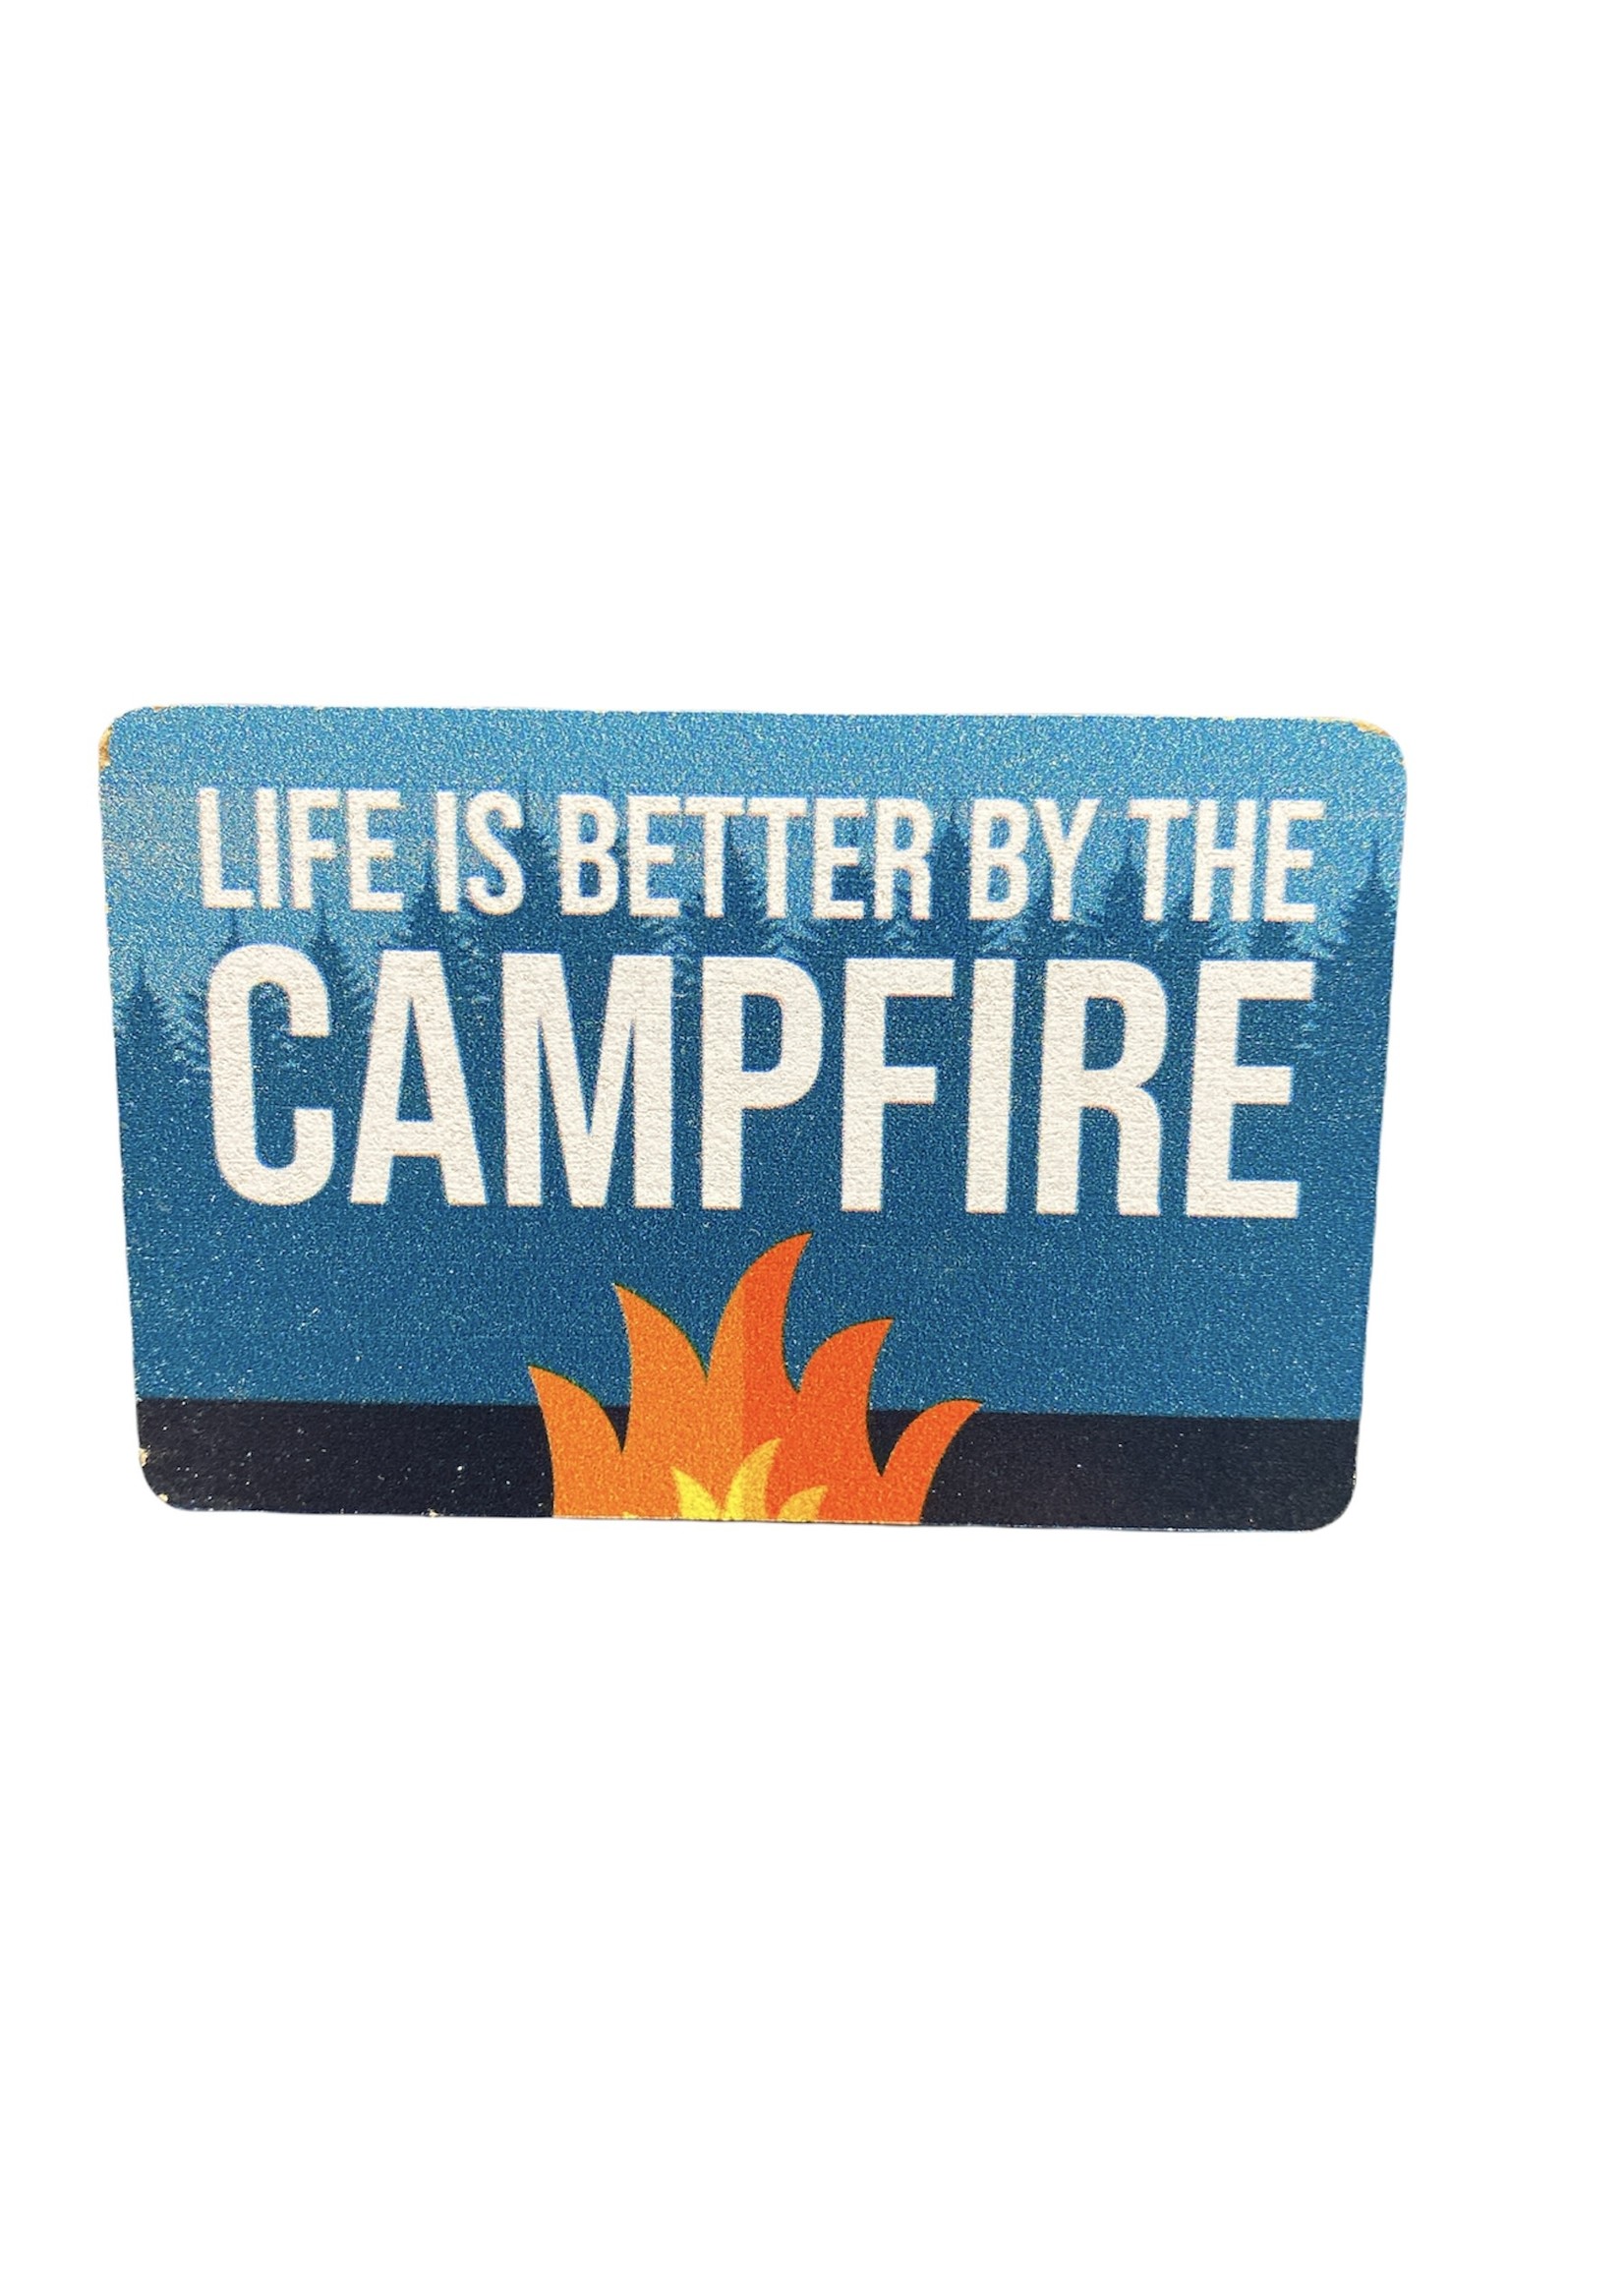 Magnet (Better by Campfire)